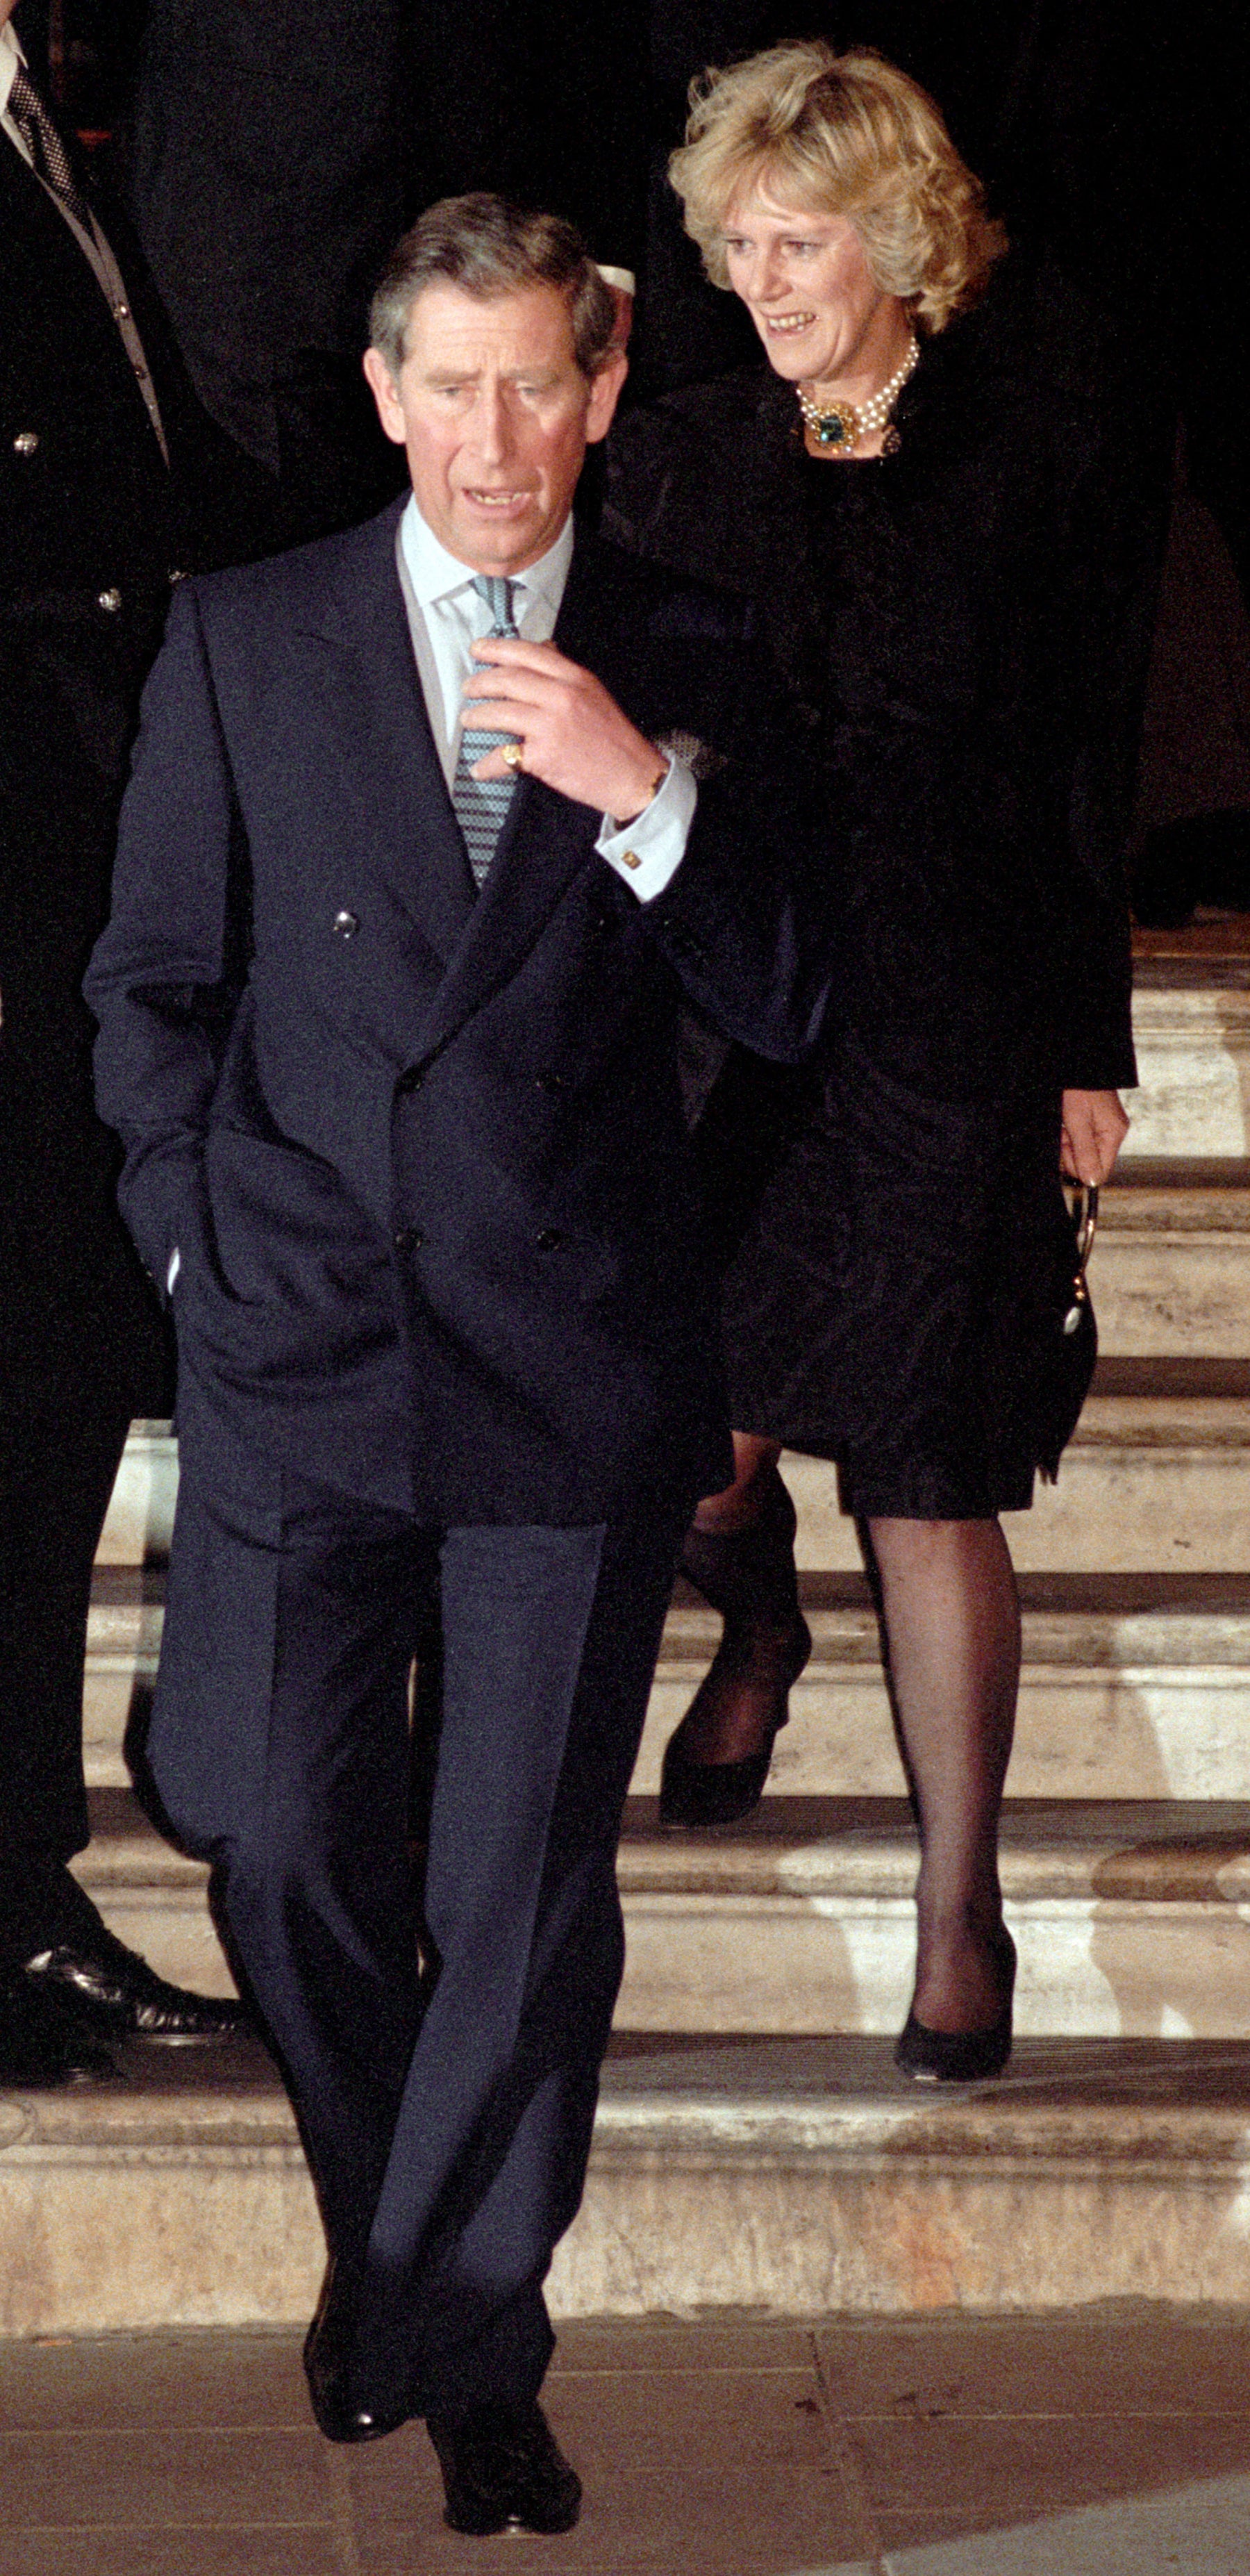 The Prince of Wales and Camilla Parker Bowles step out in public together for the first time in 1999 (John Stillwell/PA)